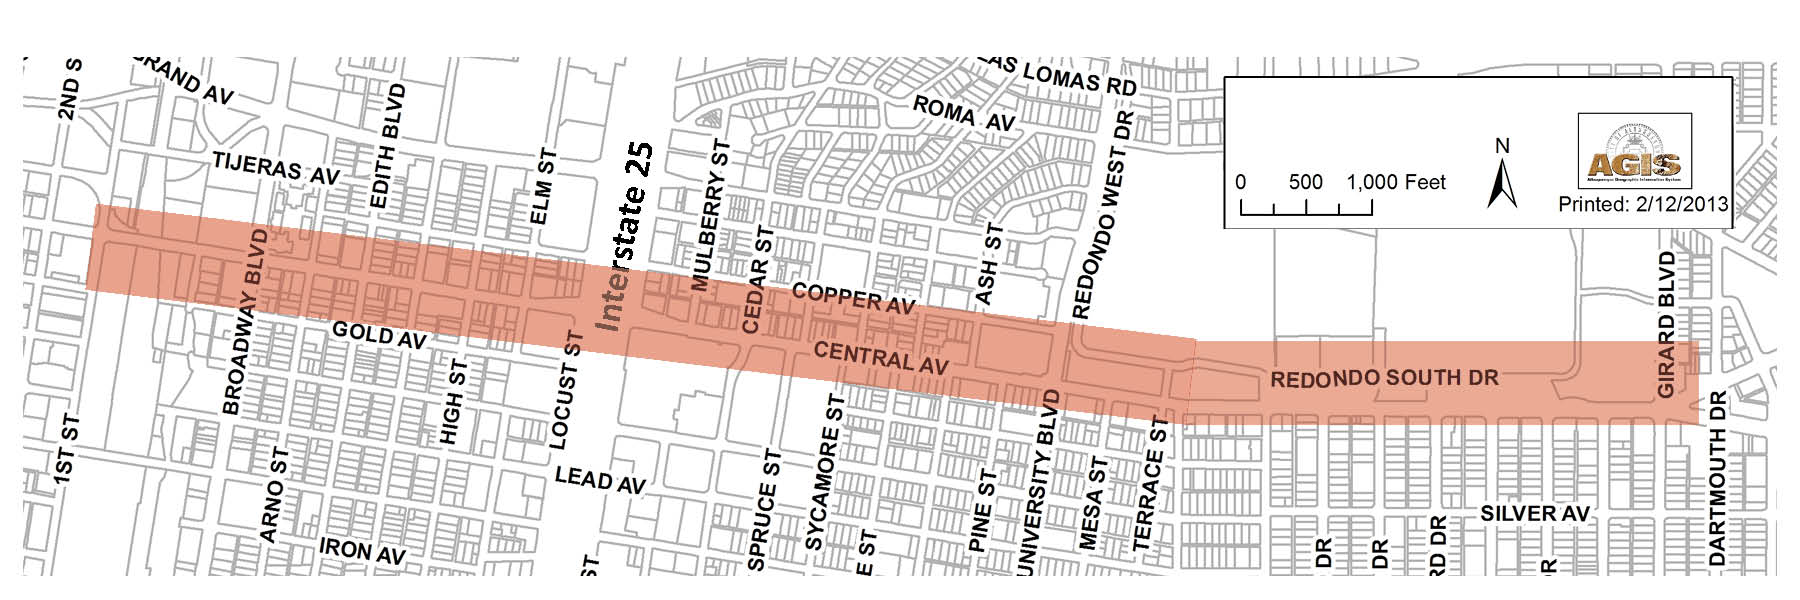 Central Complete Street Map